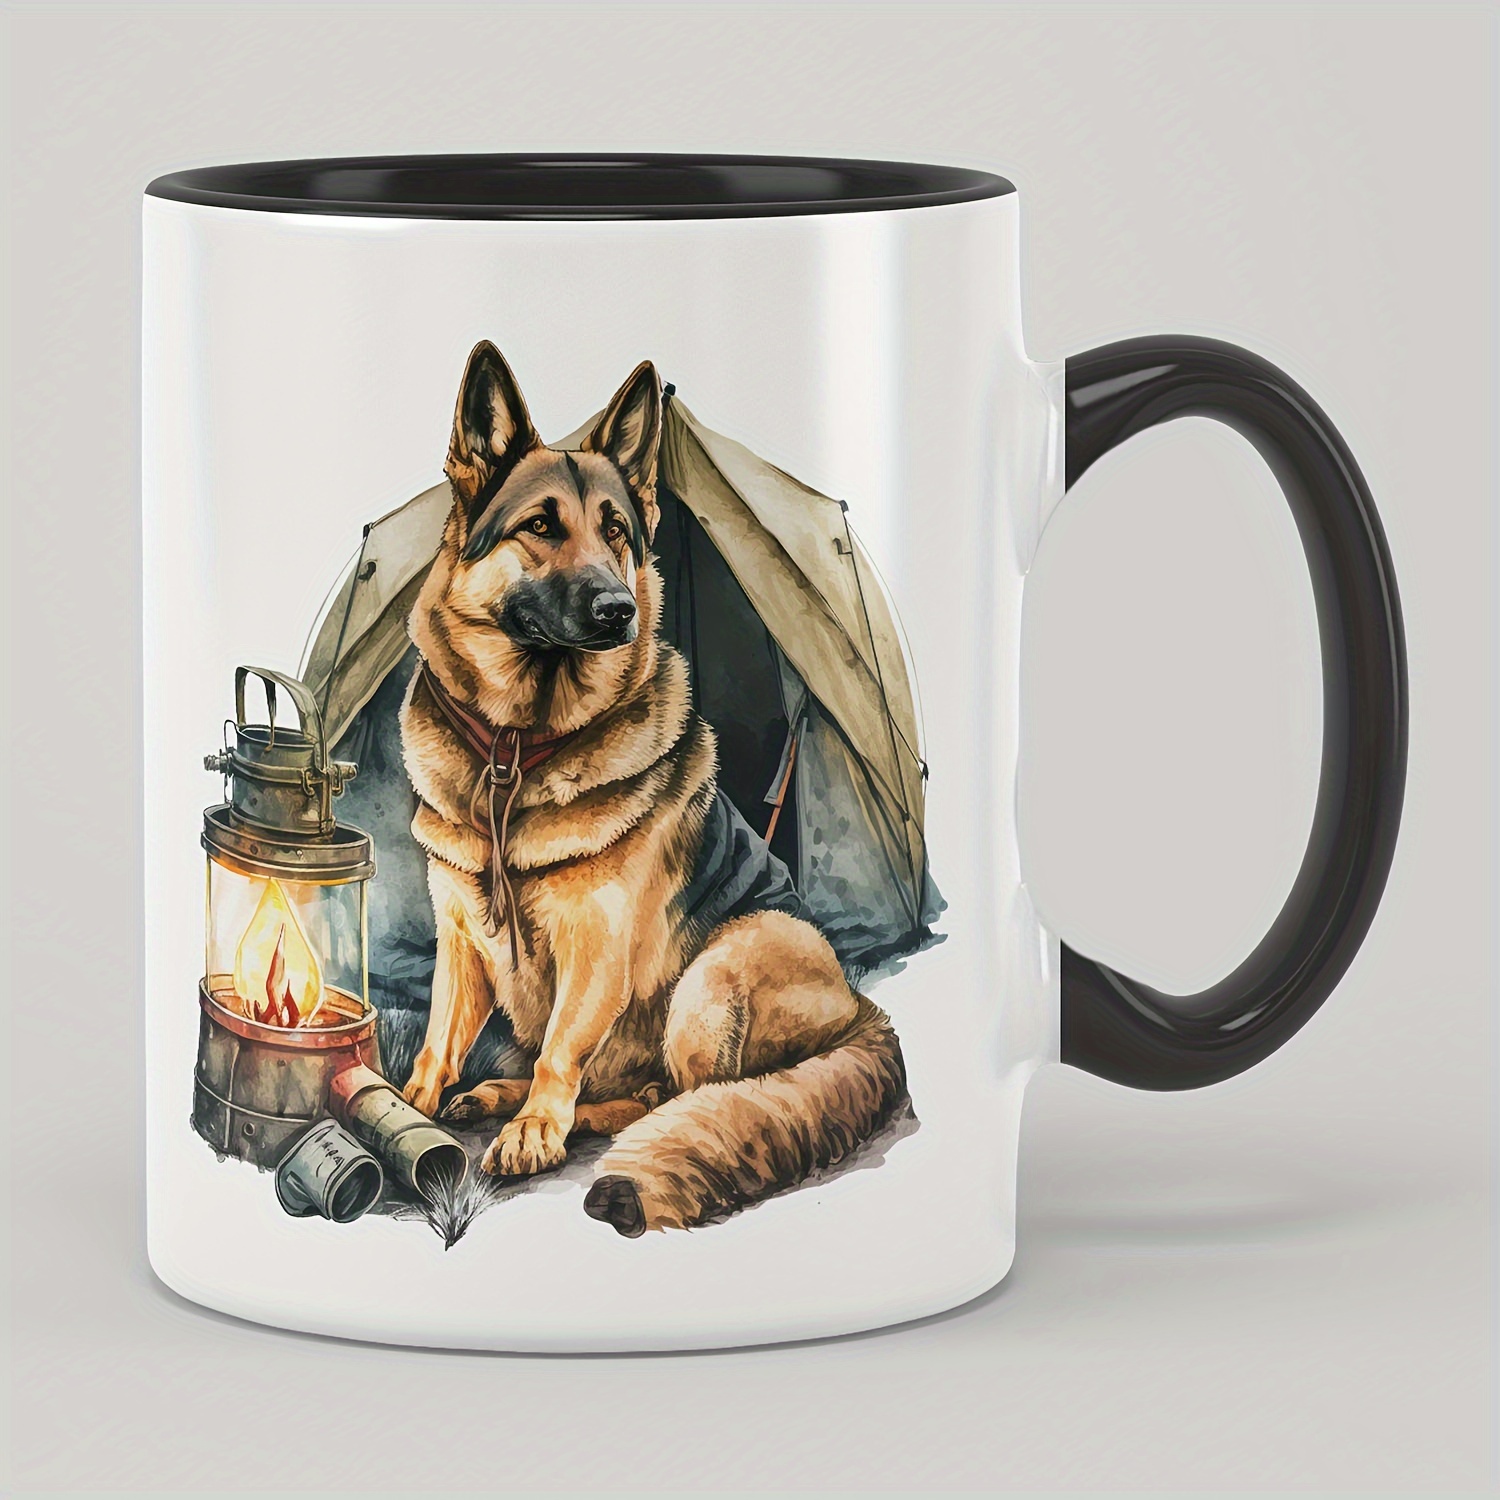 

11oz 330ml Creative Ceramic Coffee Mug With Campfire Wolf Design, Funny Cute Coffee Cup For Friends, Parents, Son, Daughter, Holiday Gift For Home And Cafe Use